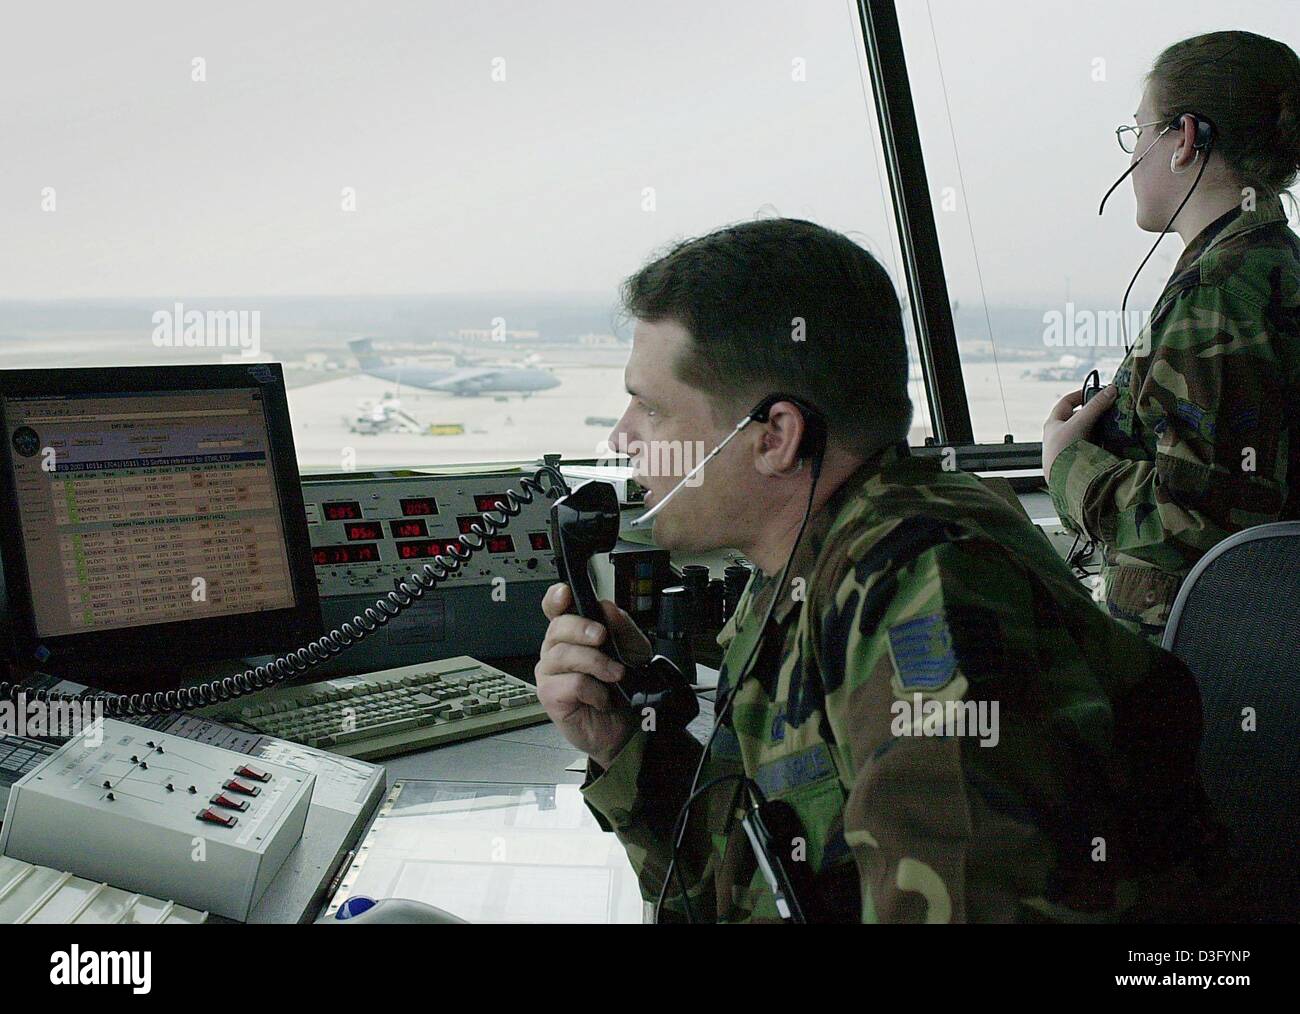 (dpa) - US soldiers control the airspace from the tower of the US airbase Ramstein near Landstuhl, western Germany, 10 February 2003. Ramstein is the biggest base of the US air force outside the United States. It is the home of the 86th airlift wing (transportation squadron) and the headquarter of the US Air Forces Europe. According to the newspaper 'Welt am Sonntag' the US defence Stock Photo